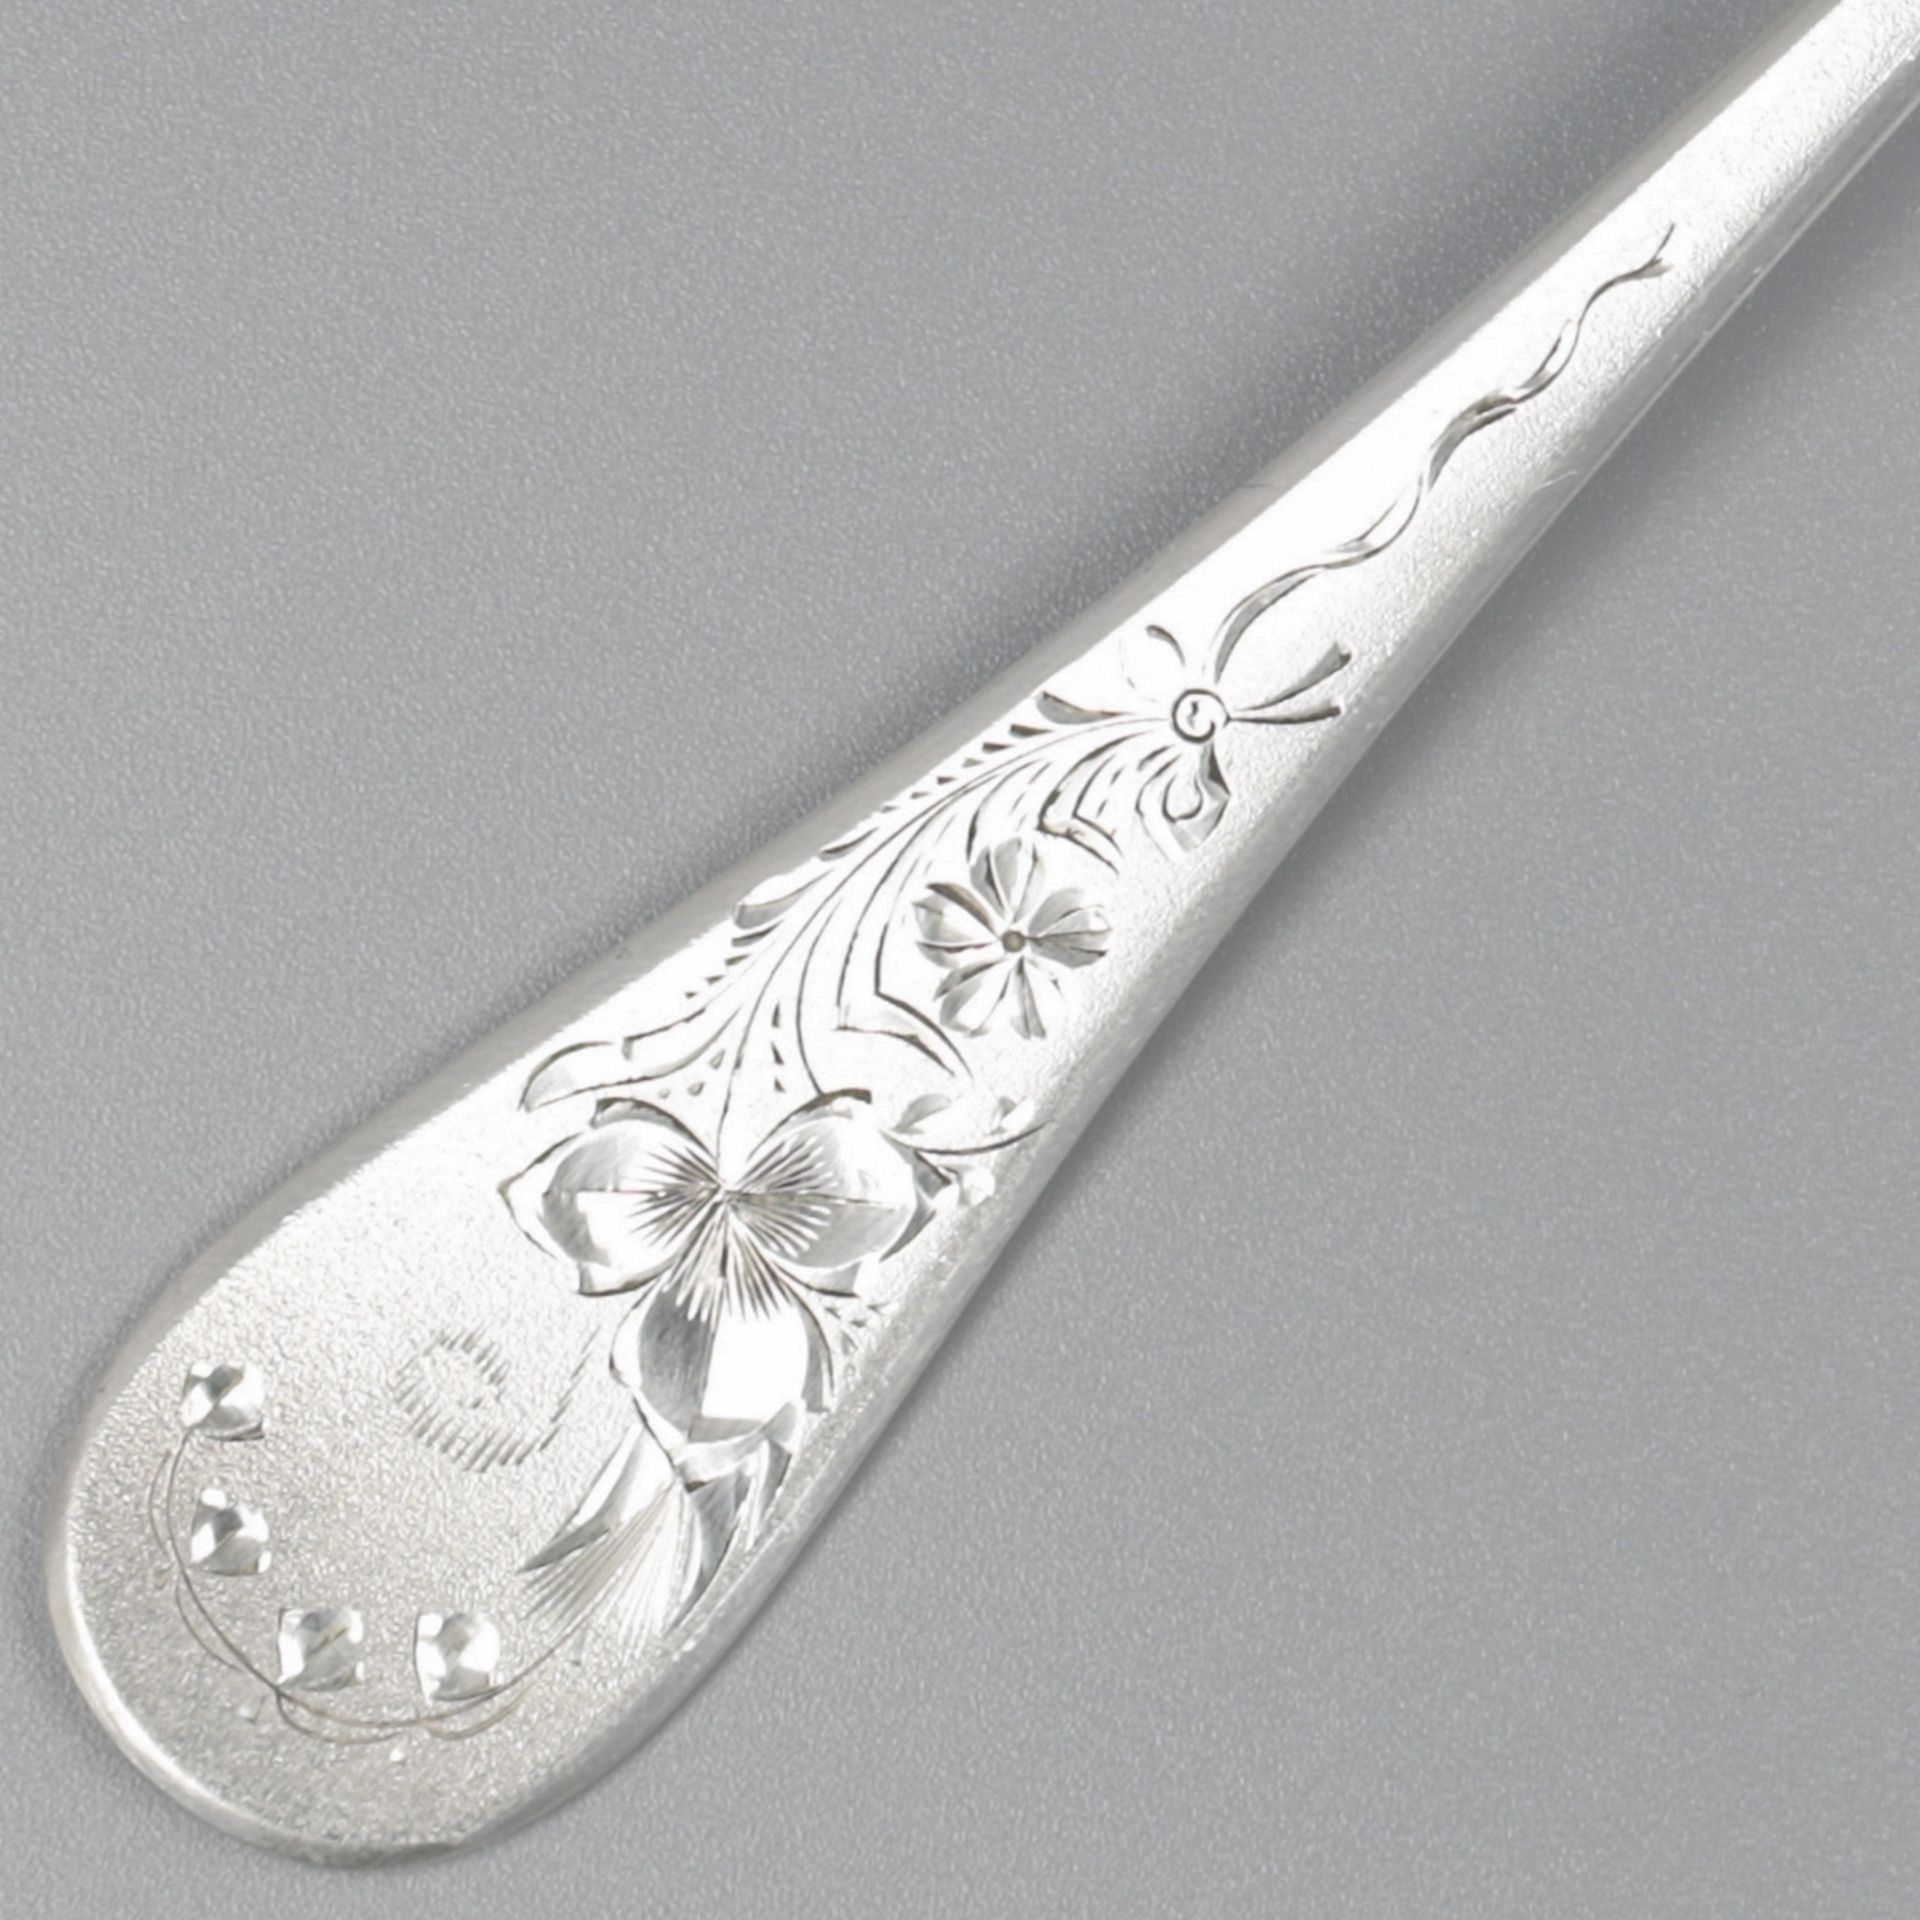 No reserve - Pastry server silver. - Image 4 of 5